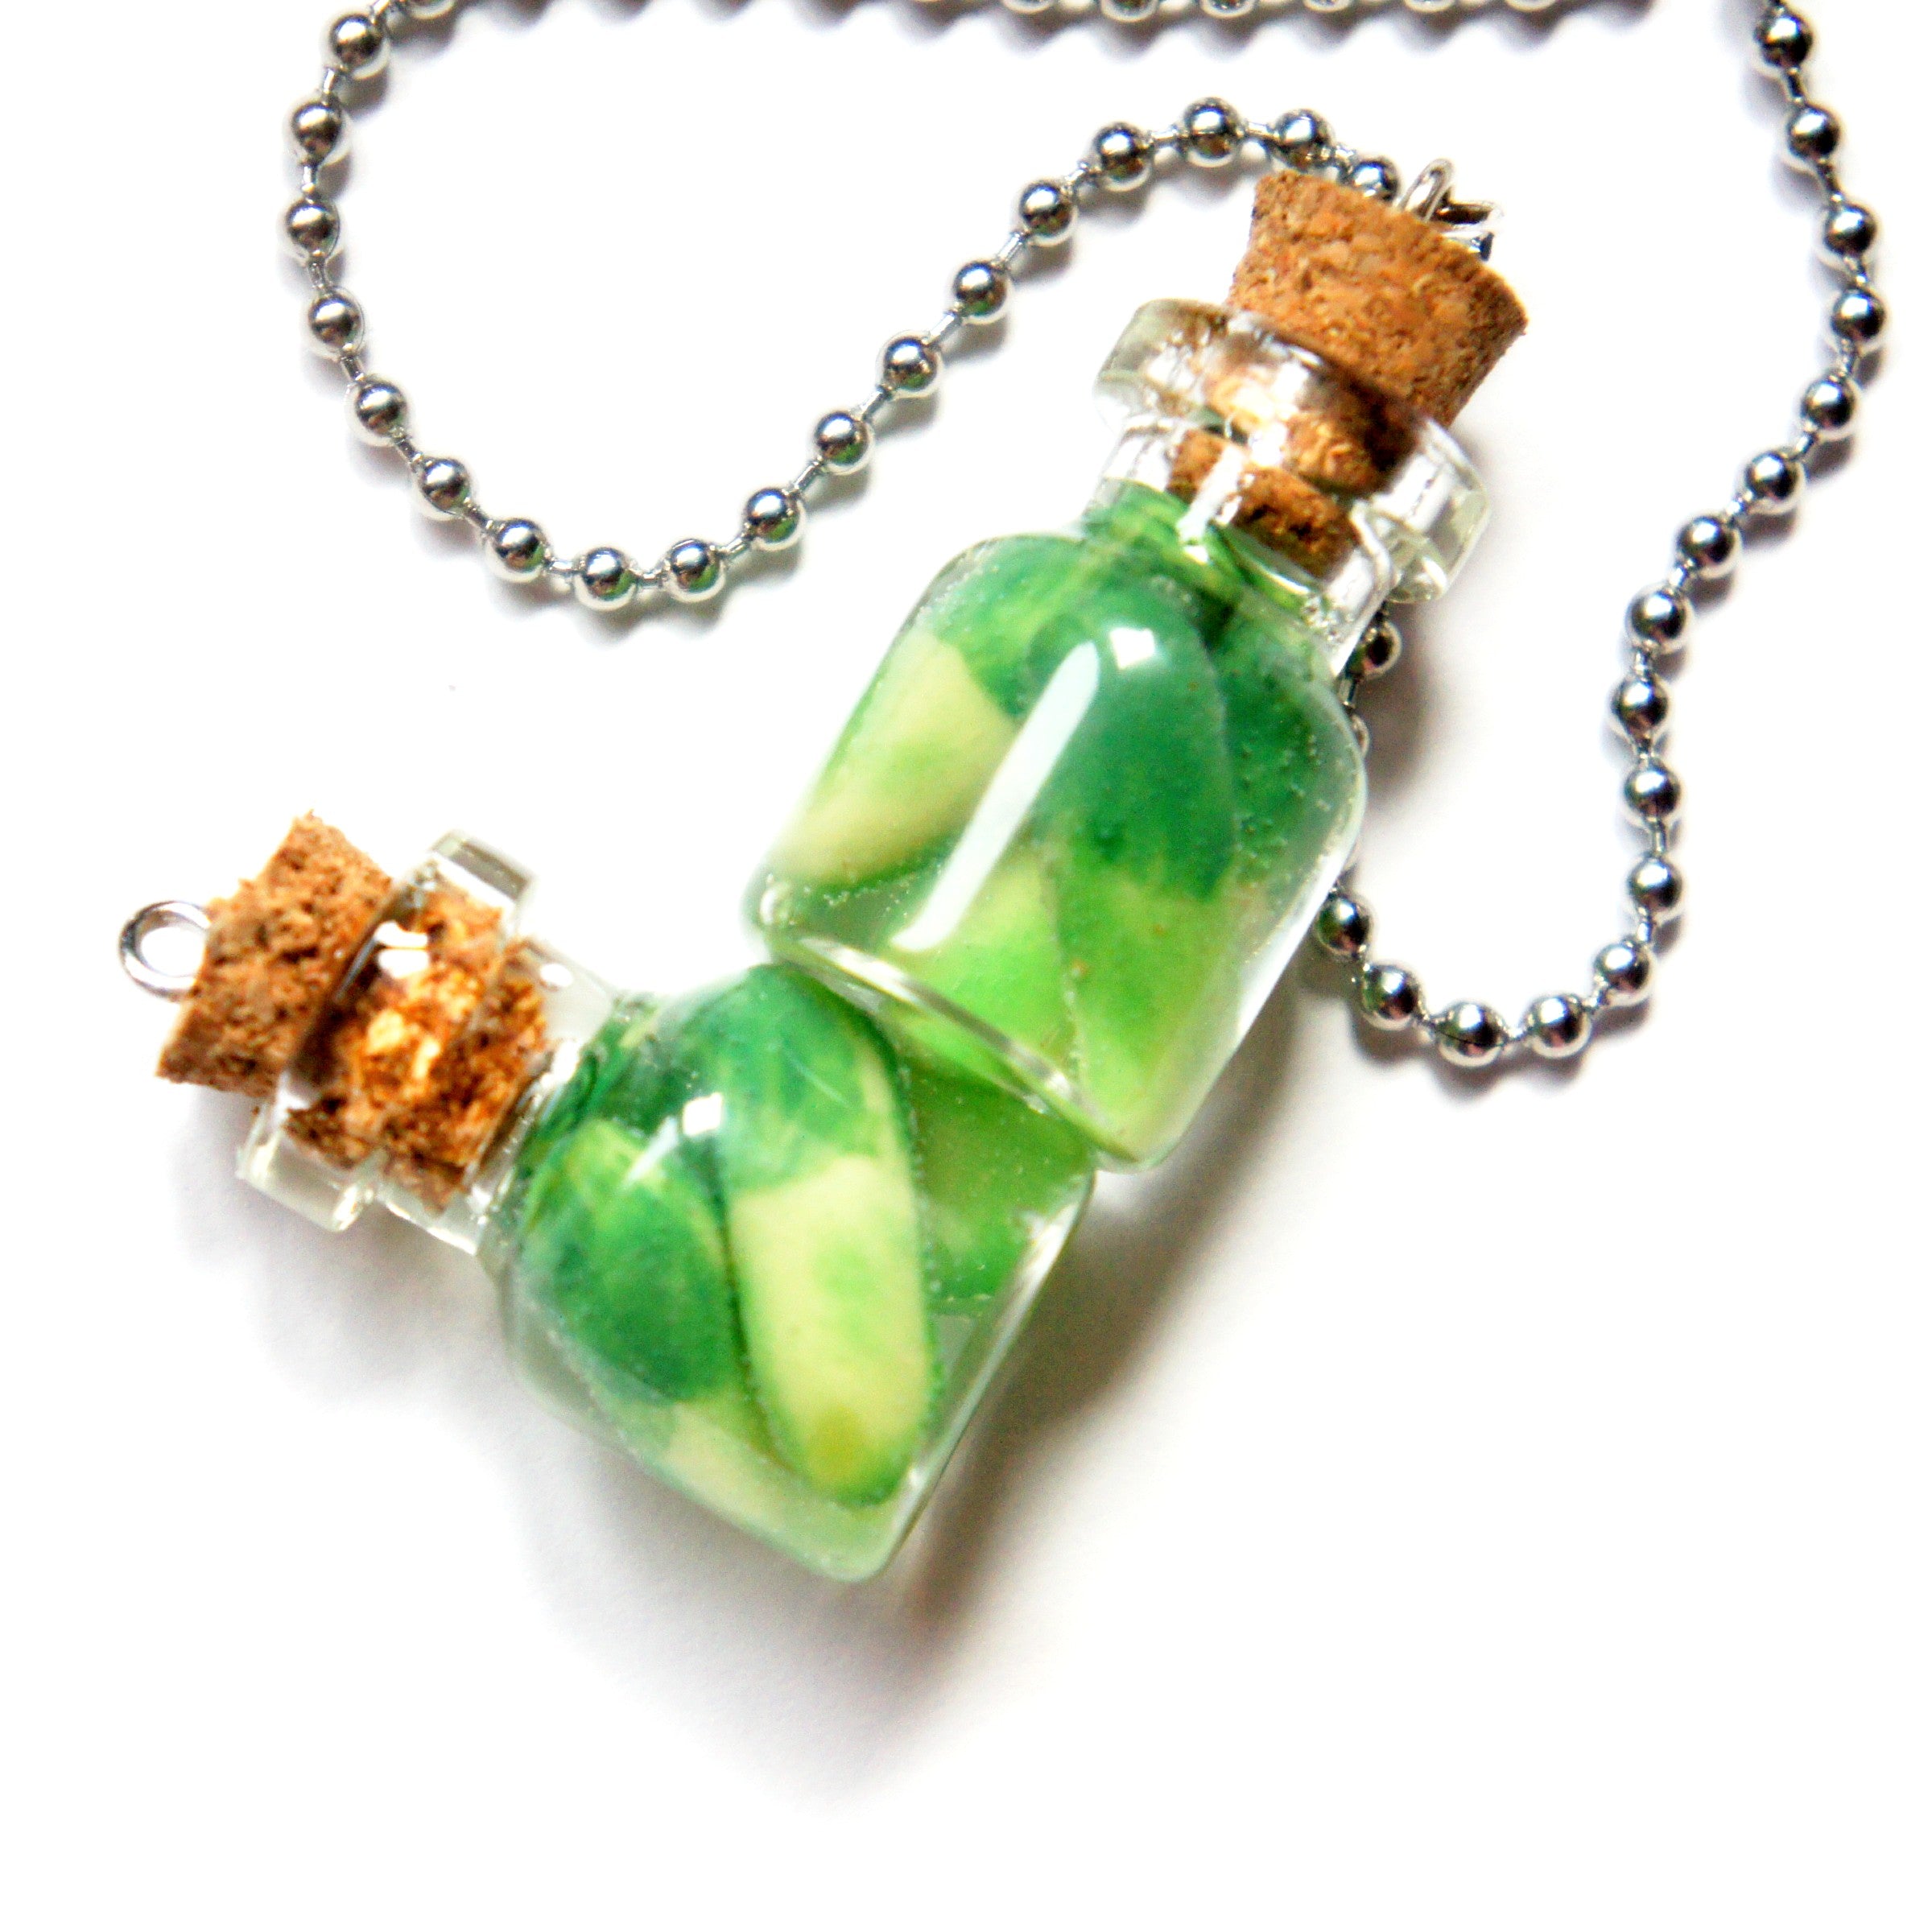 Pickles in a Jar Necklace - Jillicious charms and accessories